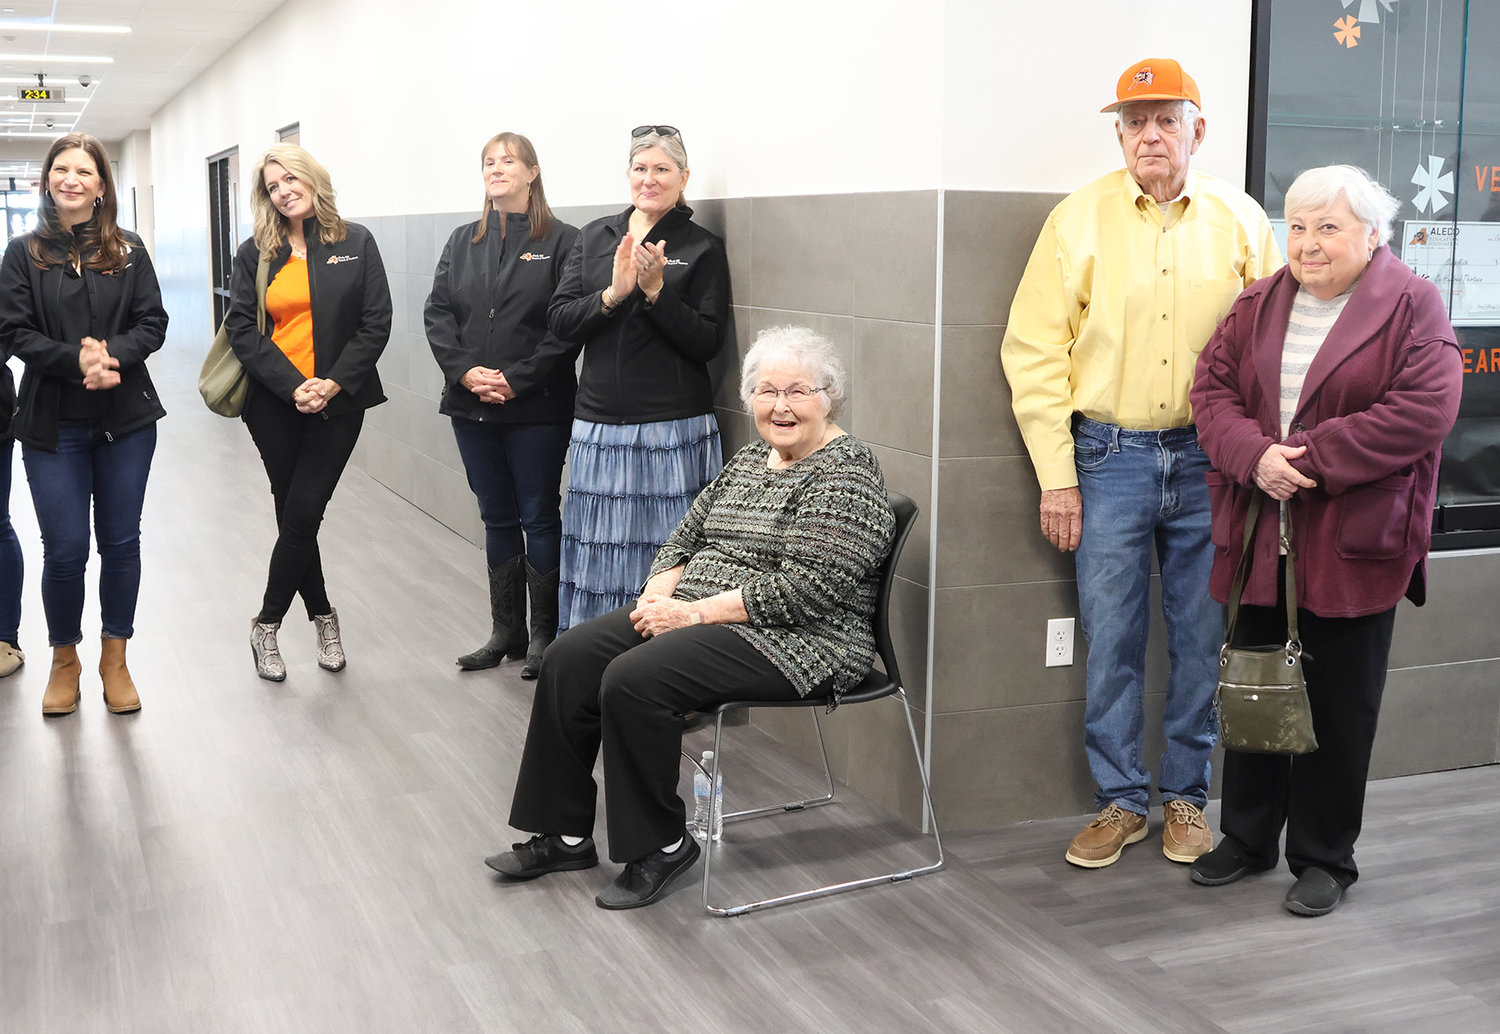 Nell McAnally, wife of the school's namesake Charles McAnally, is shown with AISD school board members at the ribbon cutting for McAnally Middle School. Also shown are Marvin and Peggie Herring.